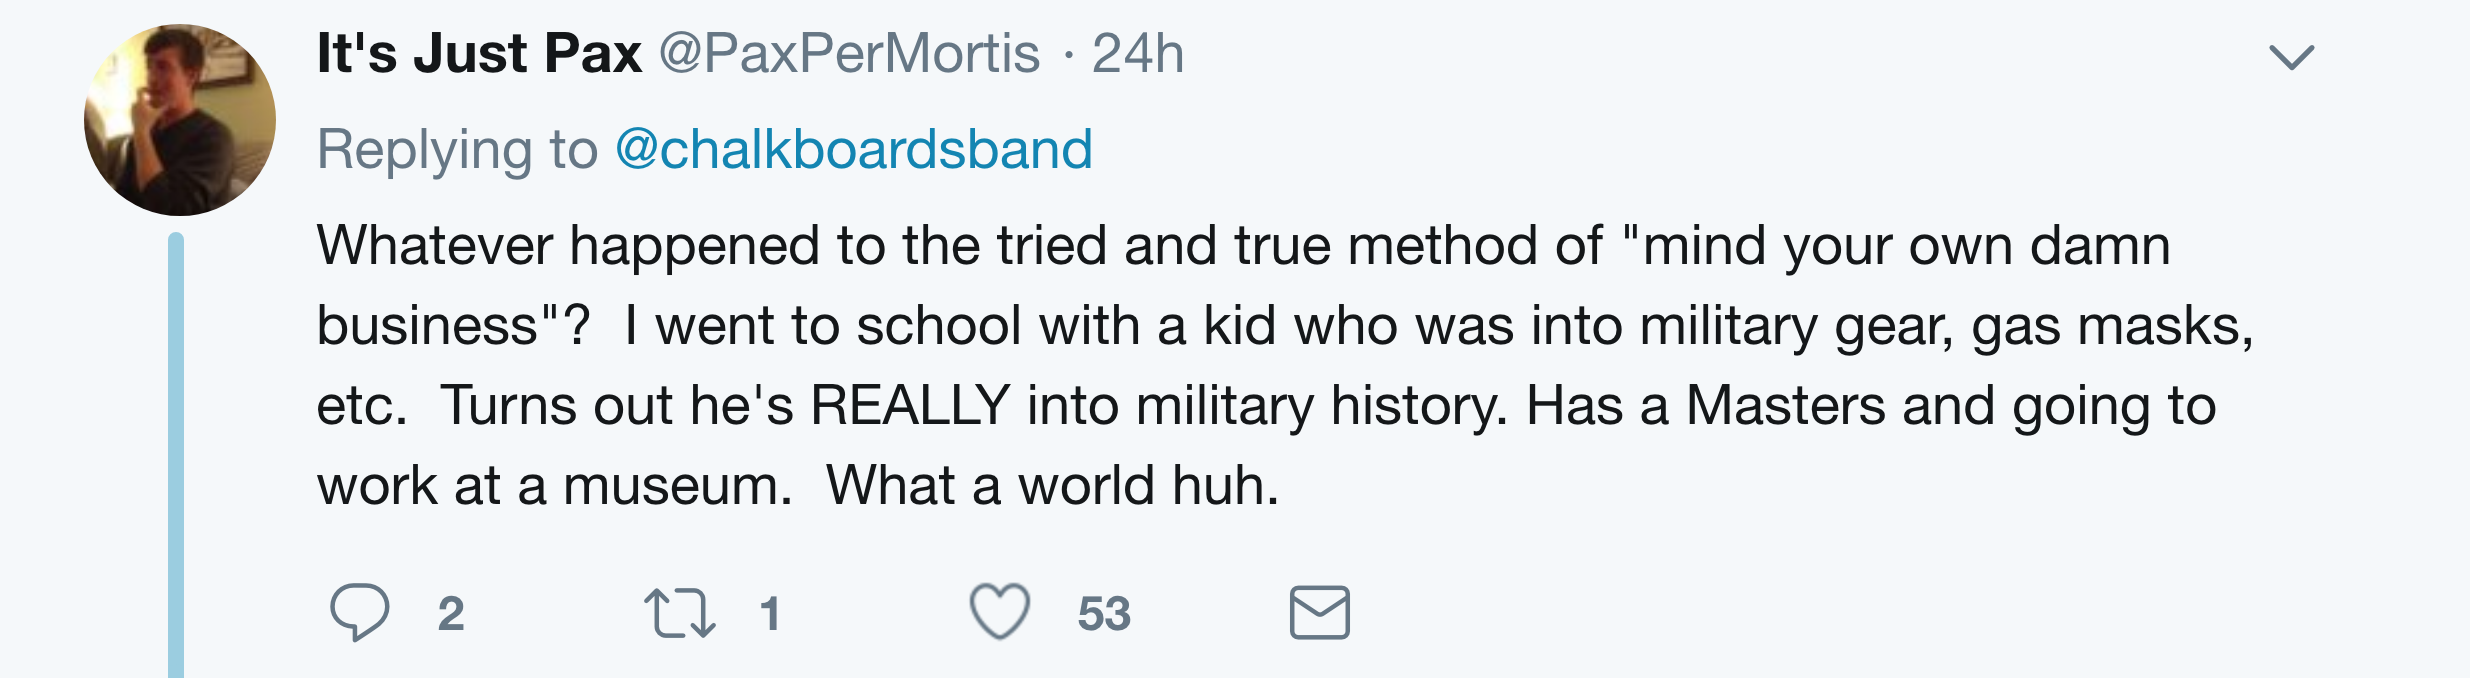 Screenshot - It's Just Pax 24h Whatever happened to the tried and true method of "mind your own damn business"? I went to school with a kid who was into military gear, gas masks, etc. Turns out he's Really into military history. Has a Masters and going to